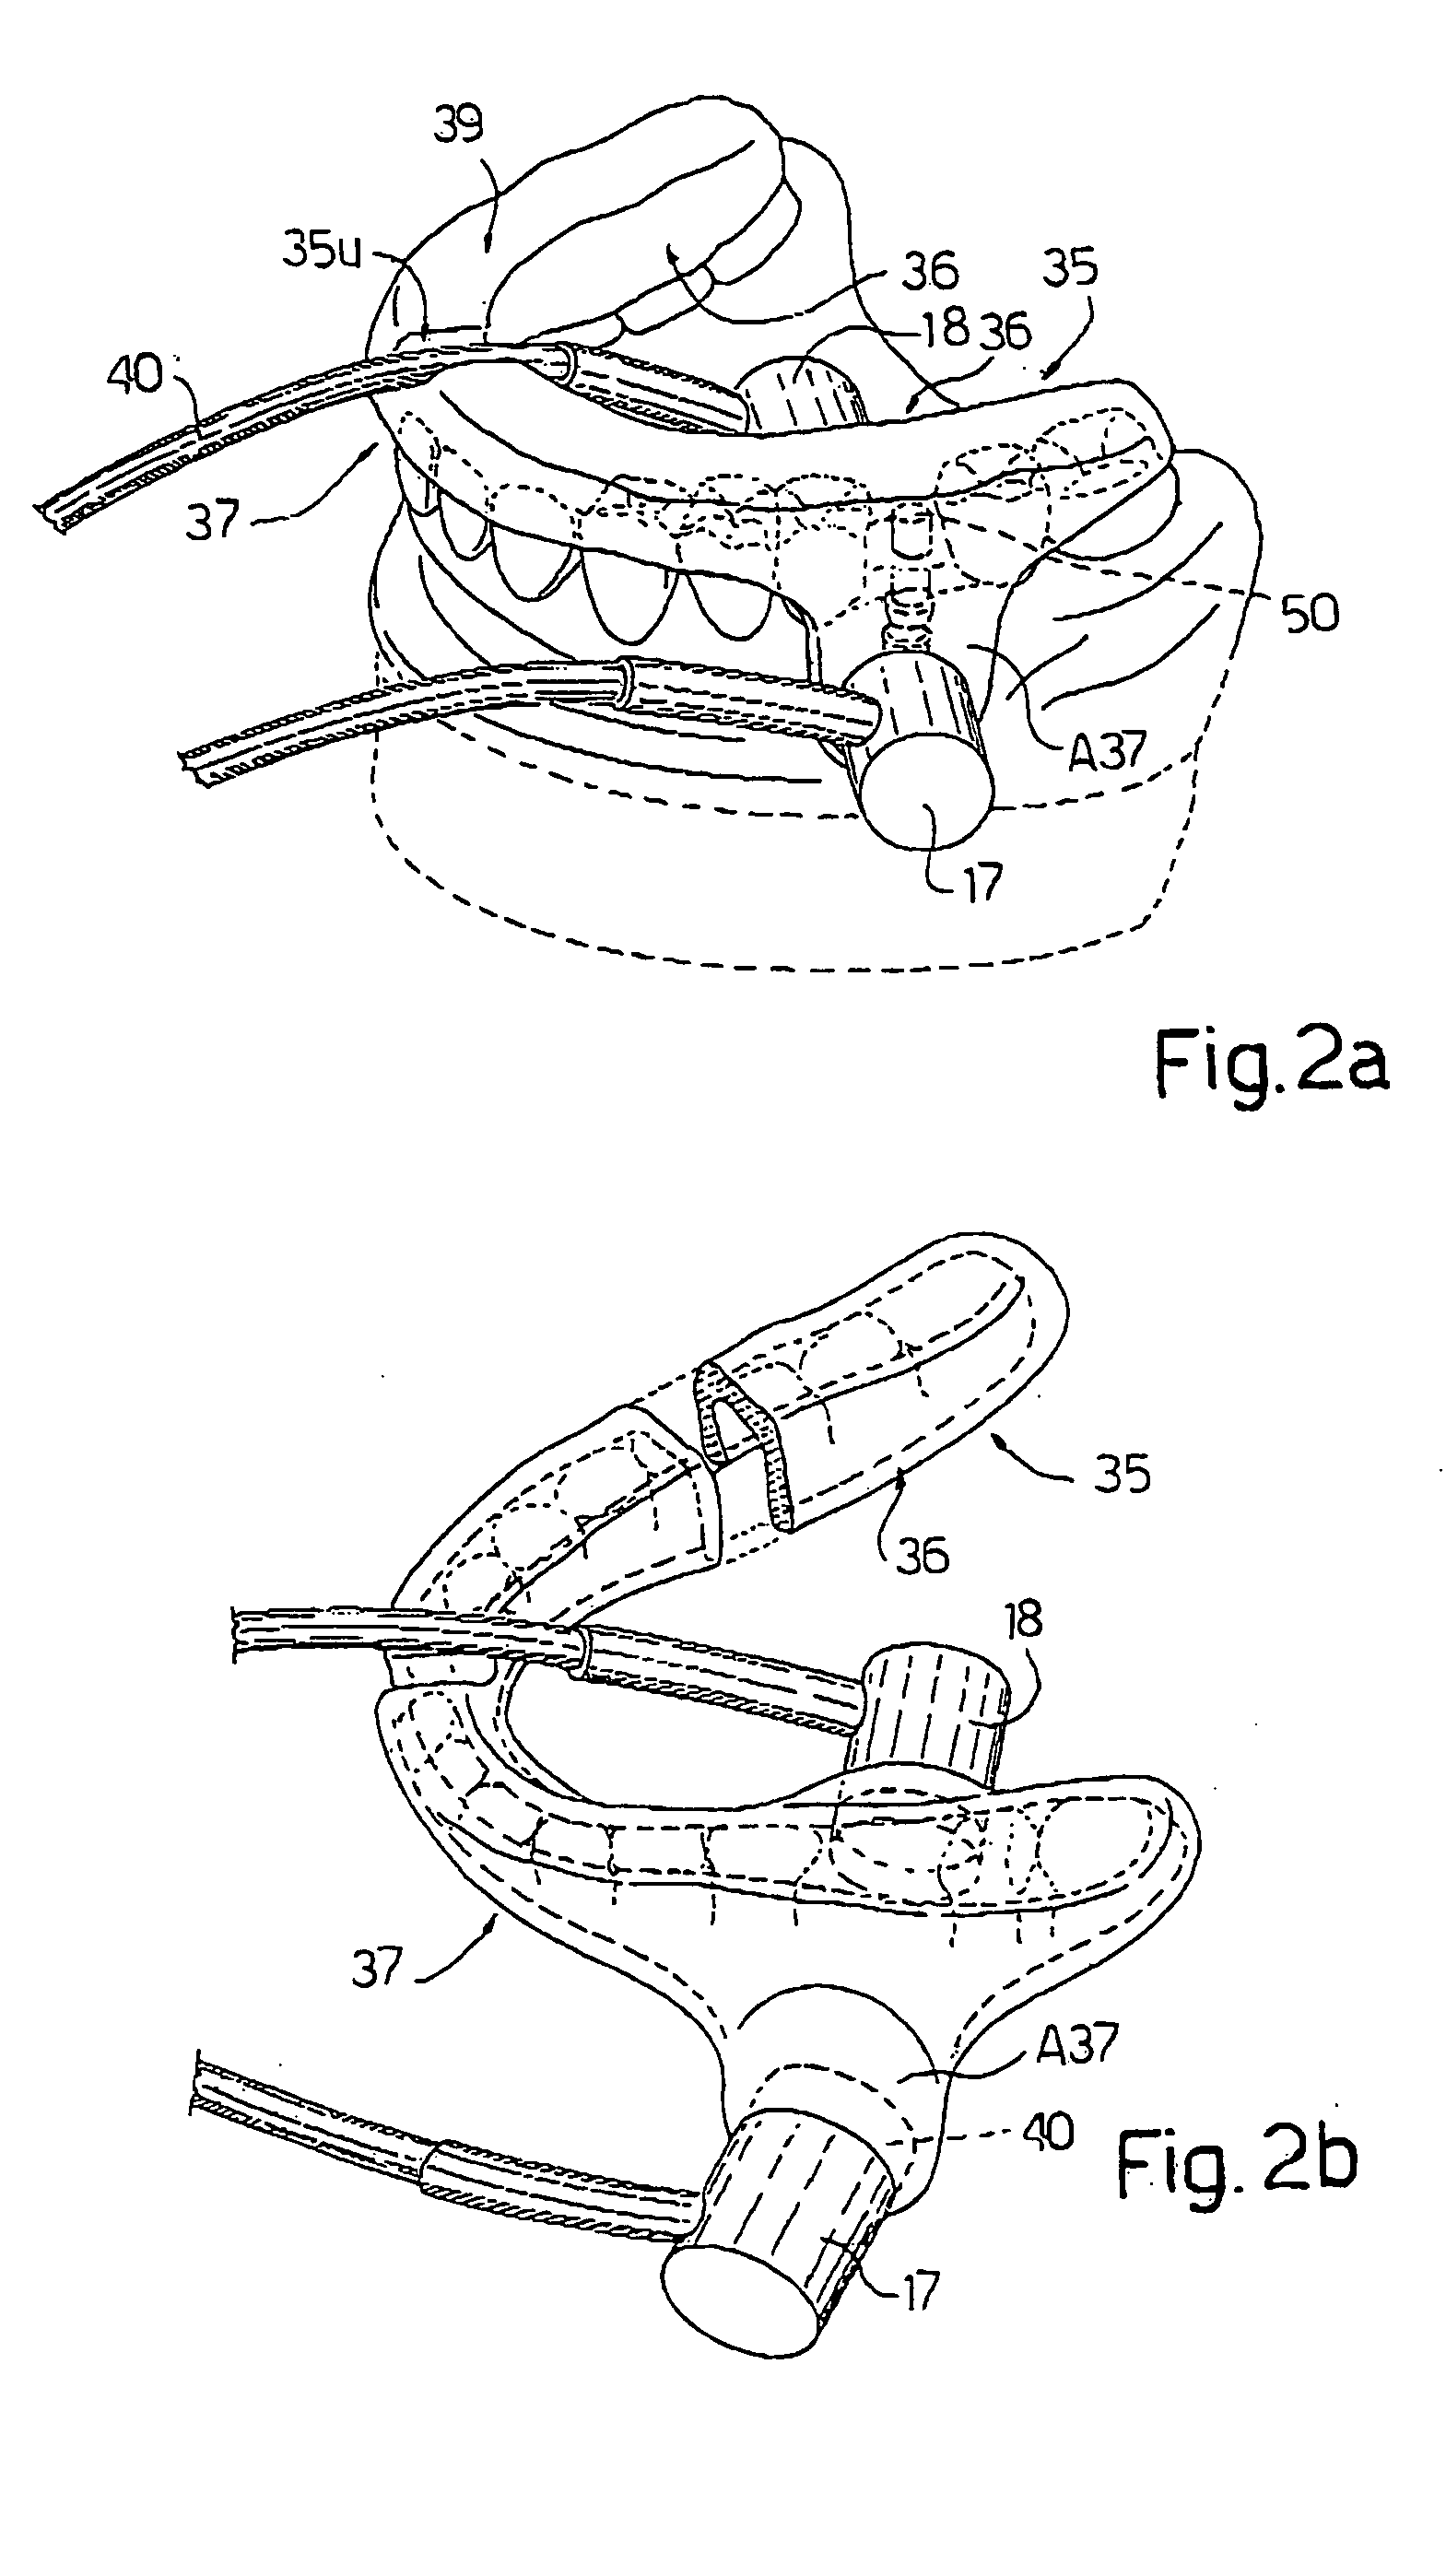 Electronic system for determining the density and structure of bone tissue and stimulating osteogenesis in dentistry